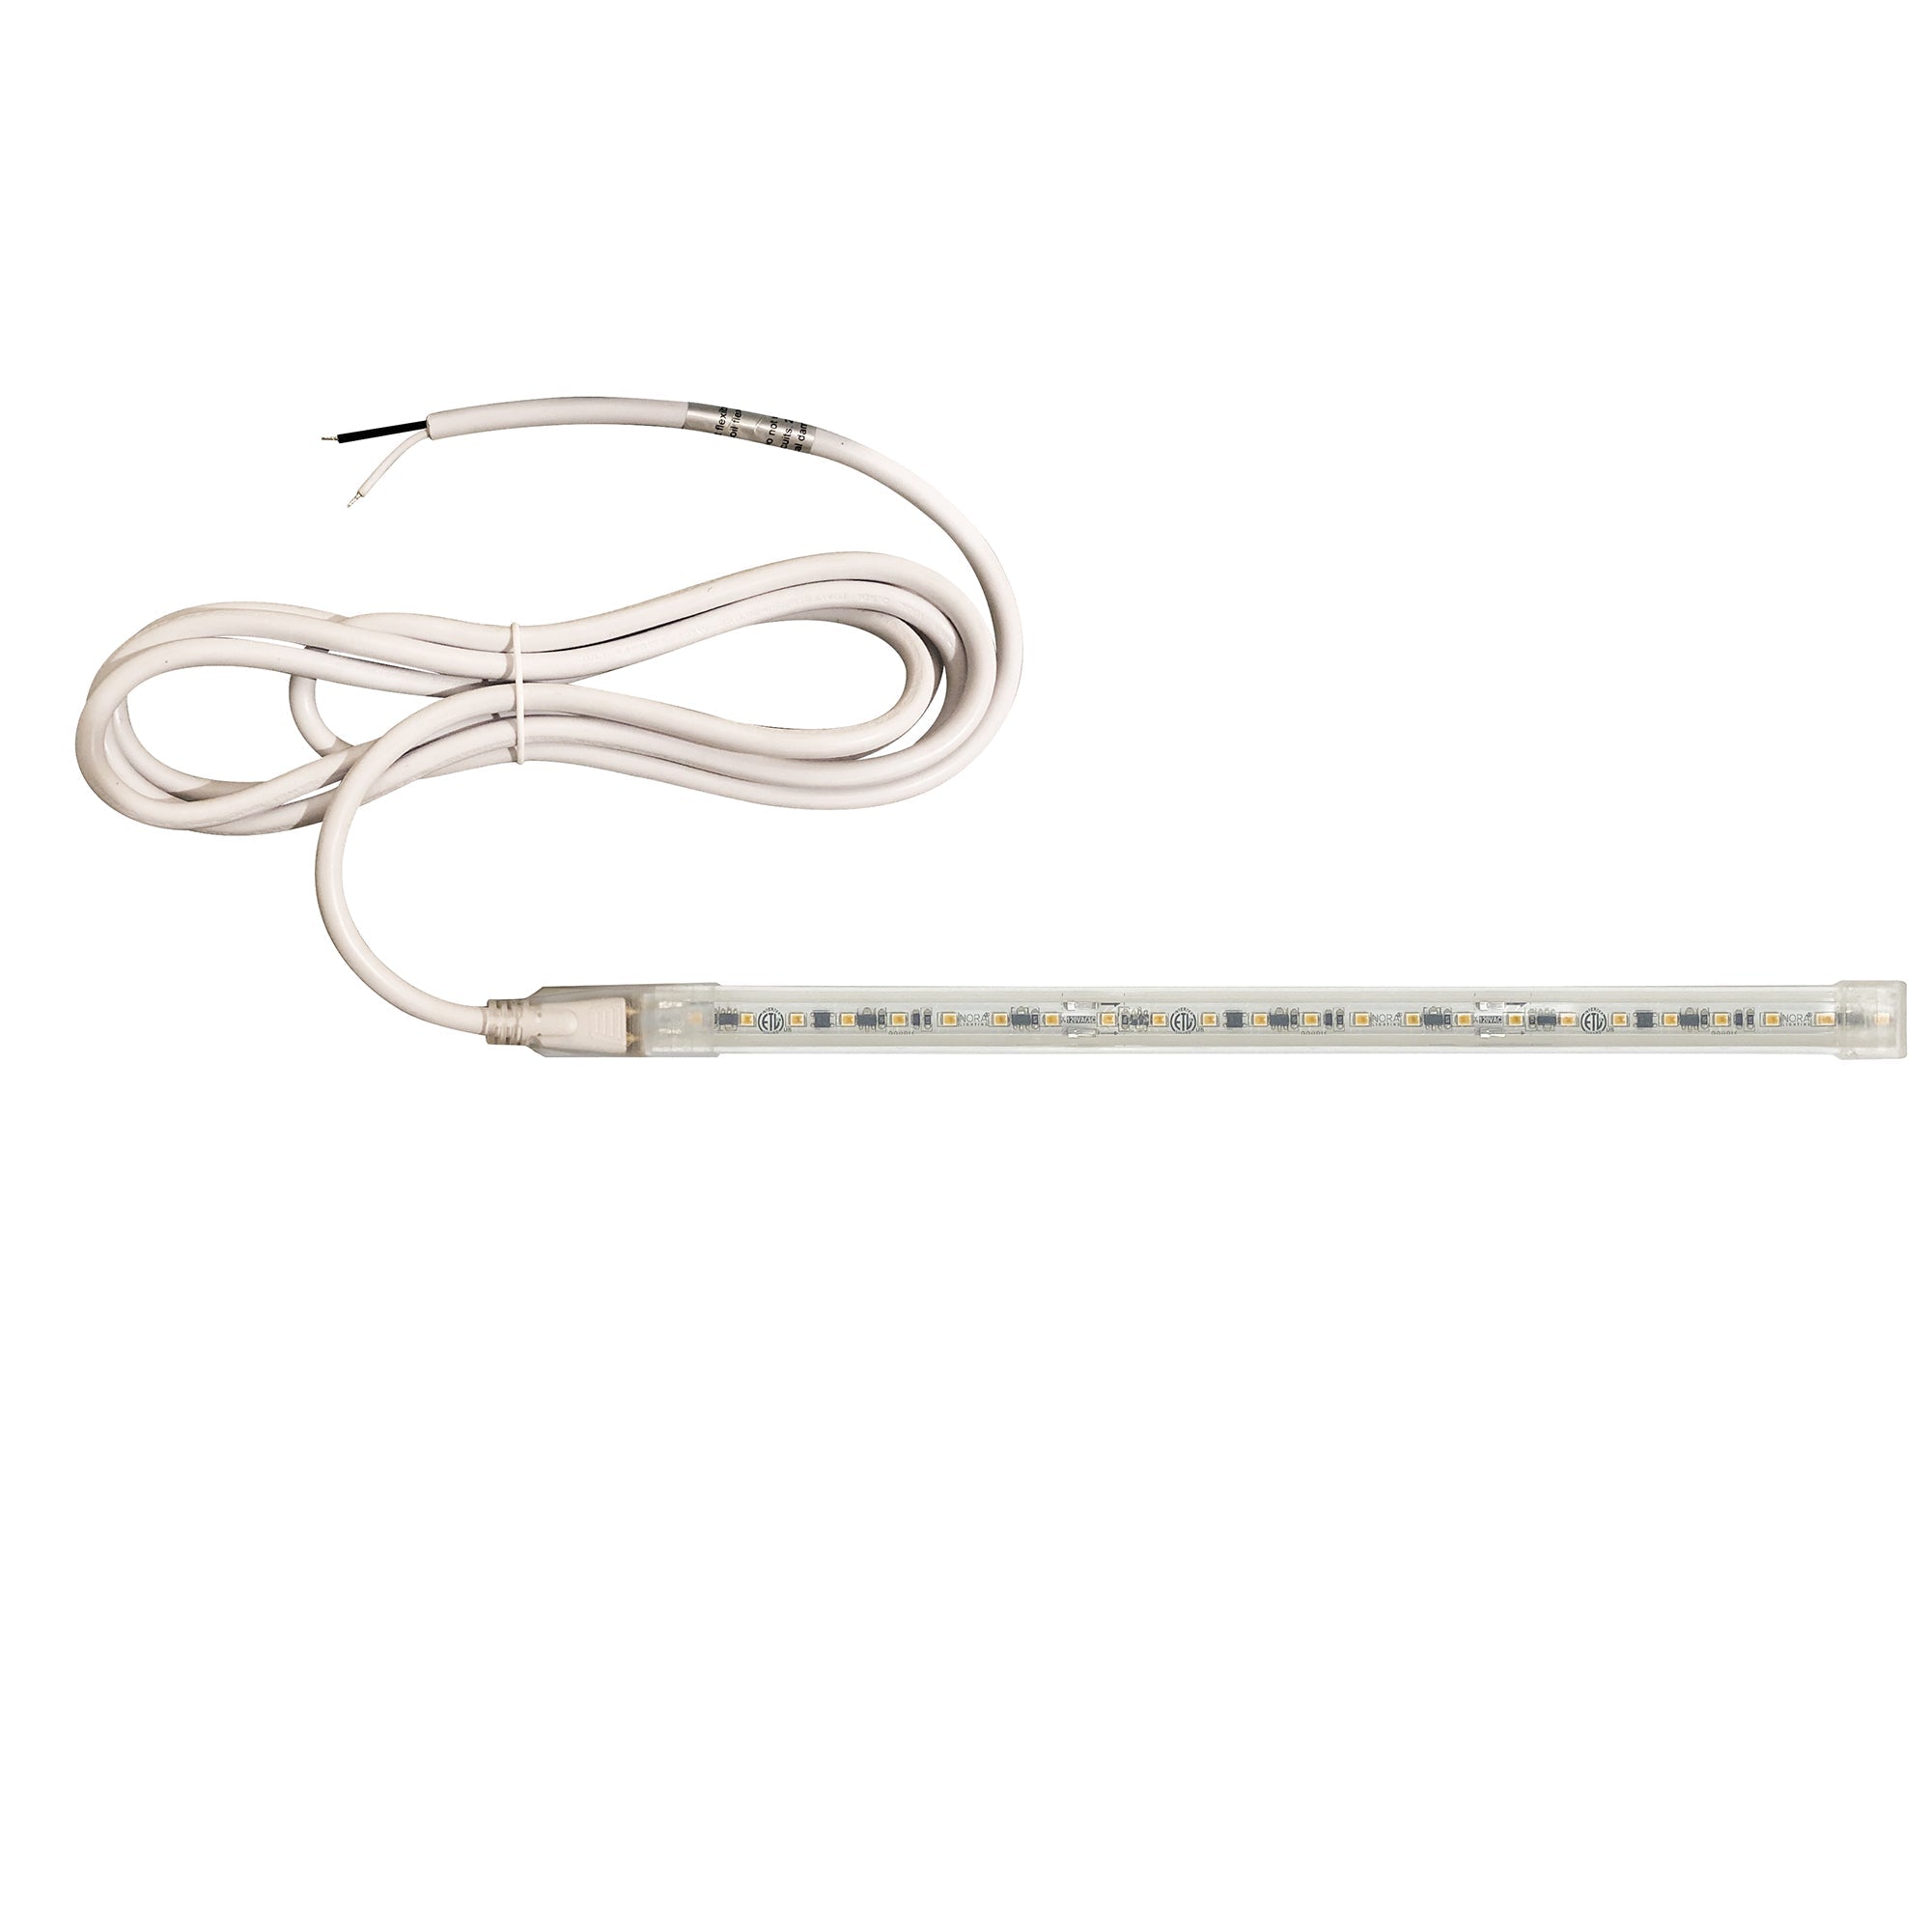 Nora Lighting NUTP13-W9-12-930/HW - Accent / Undercabinet - Custom Cut 9-ft 120V Continuous LED Tape Light, 330lm / 3.6W per foot, 3000K, w/ Mounting Clips and 8' Hardwired Power Cord